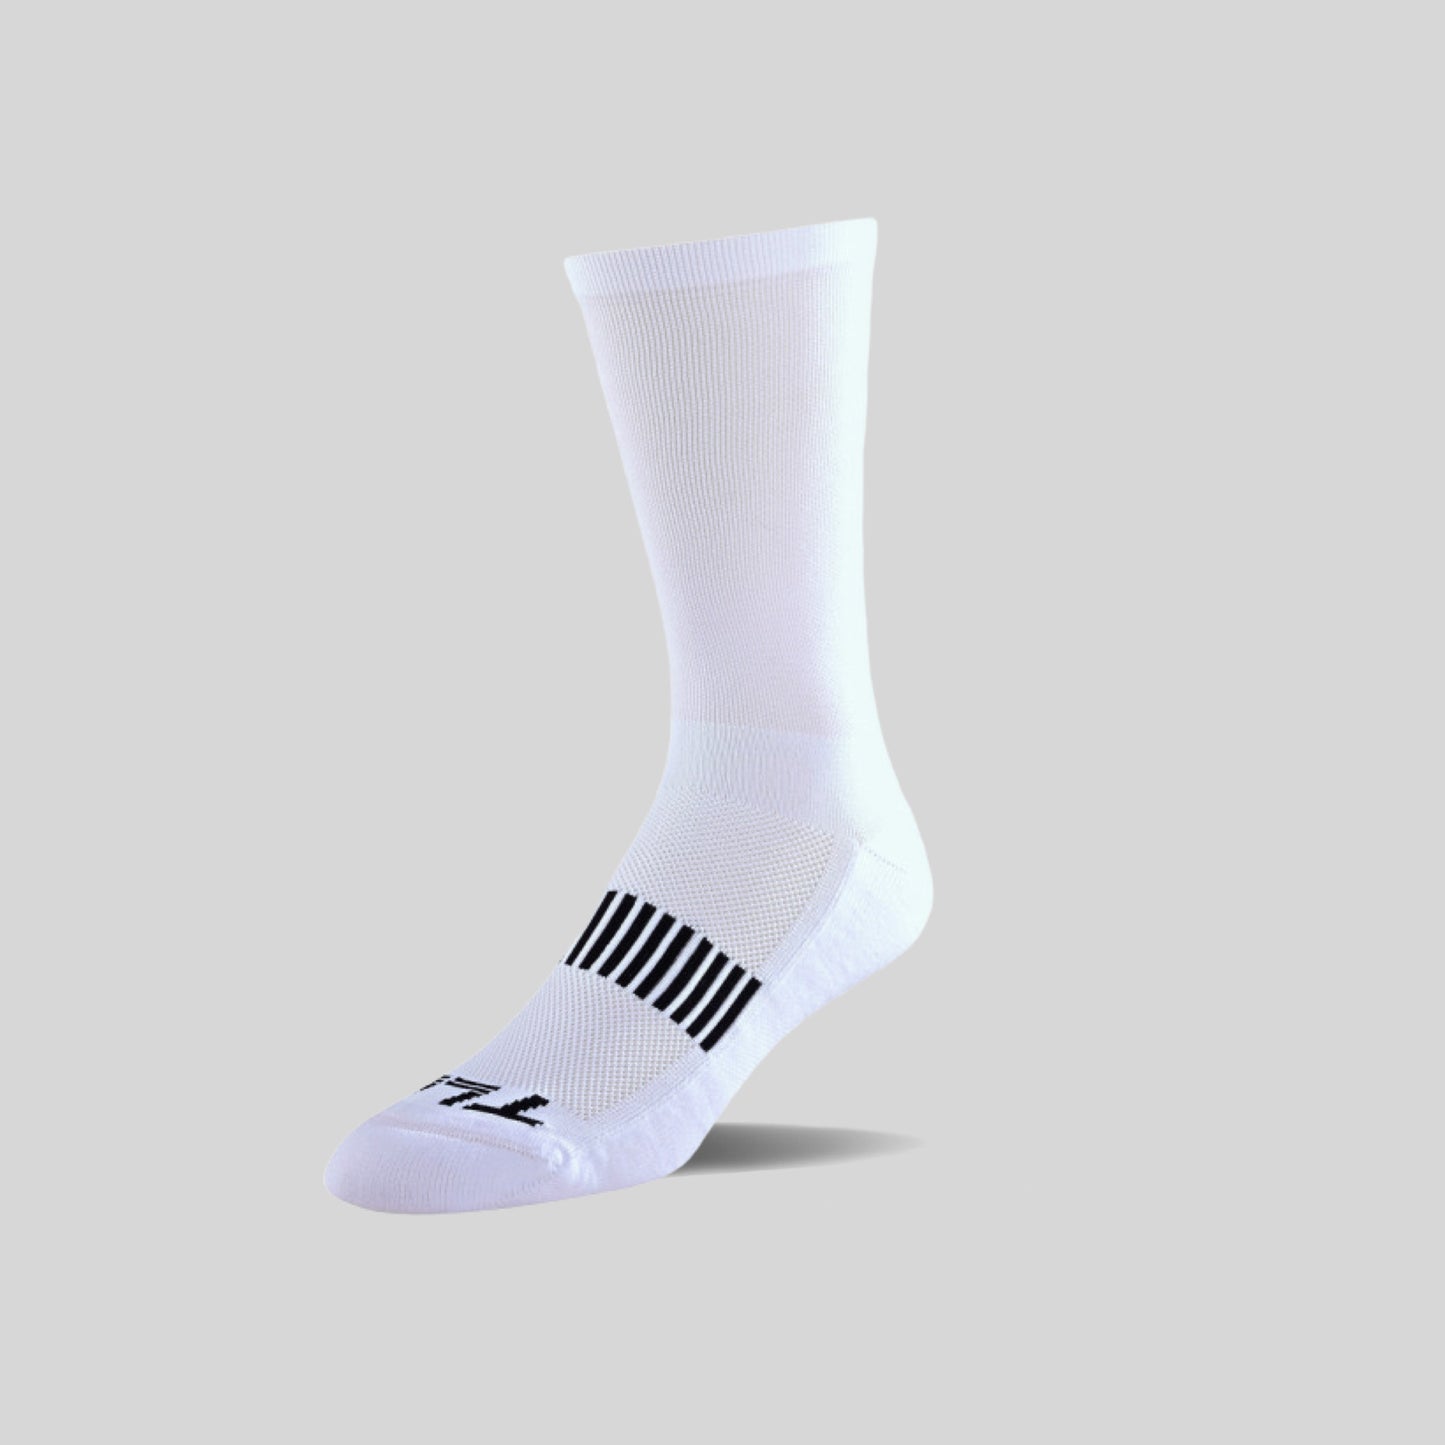 Troy Lee Designs Performance Signature Socks White from Ascender Cycling Club Zürich Switzerland Side View